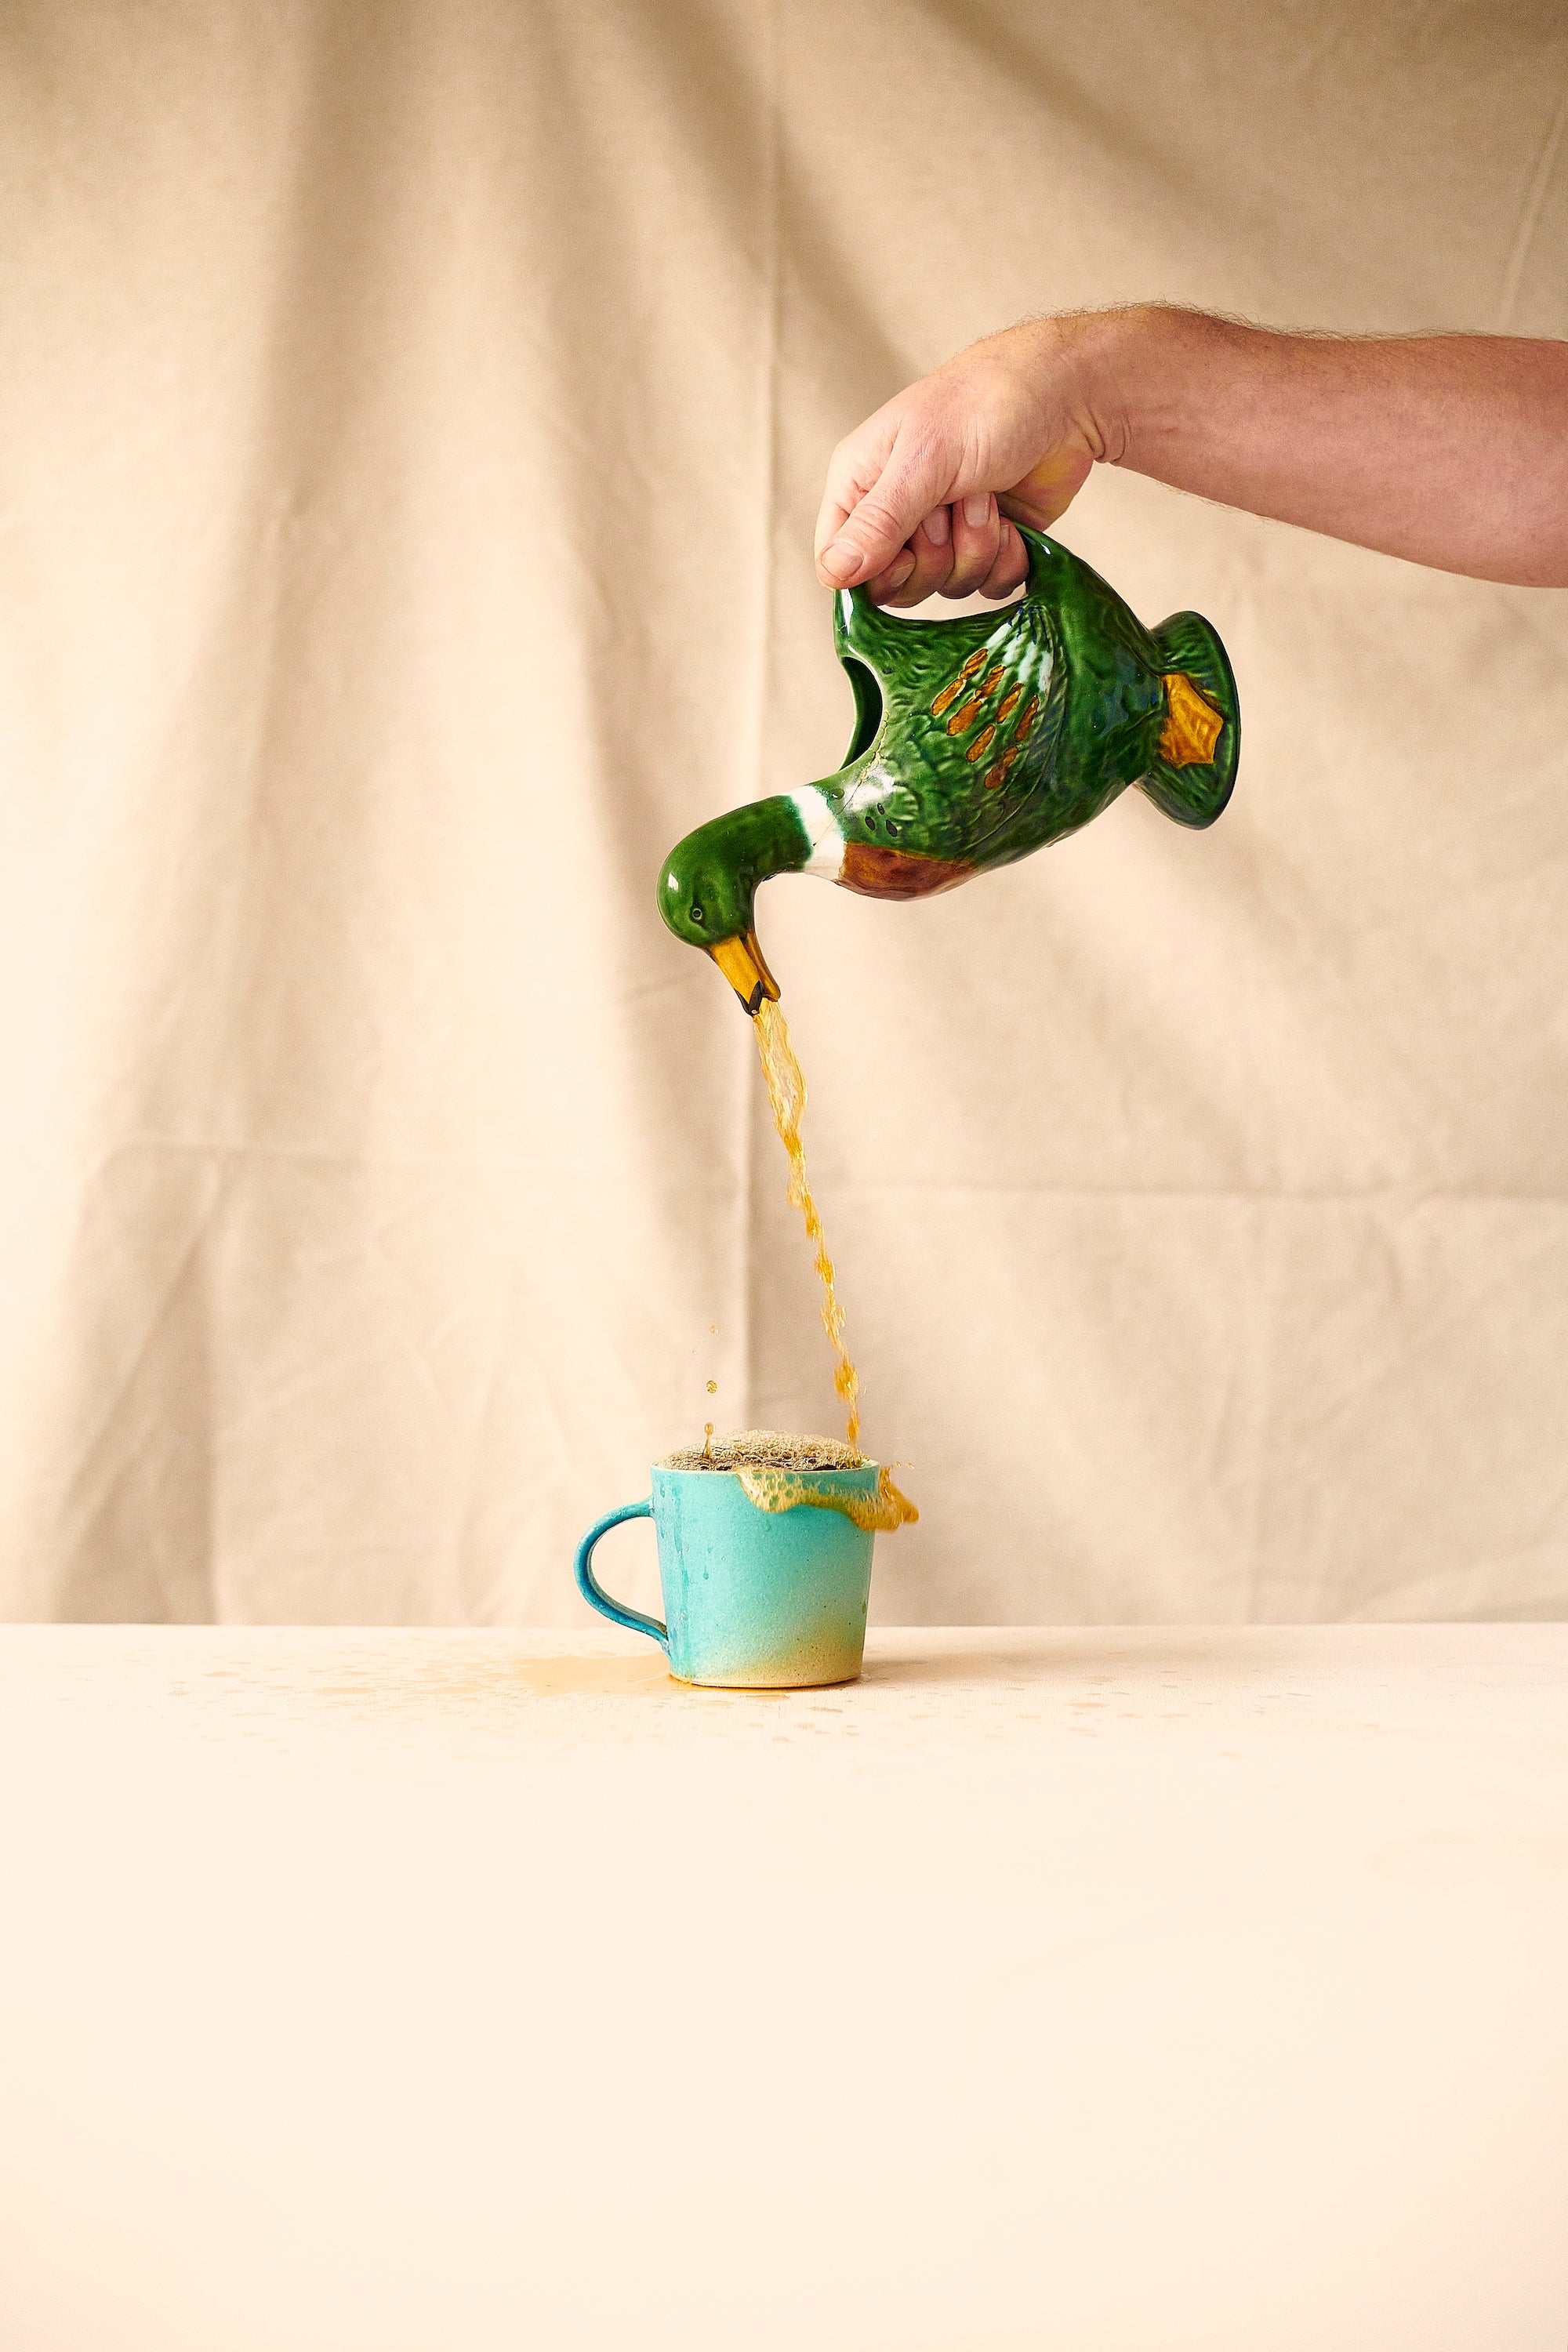 Canton Tea being poured